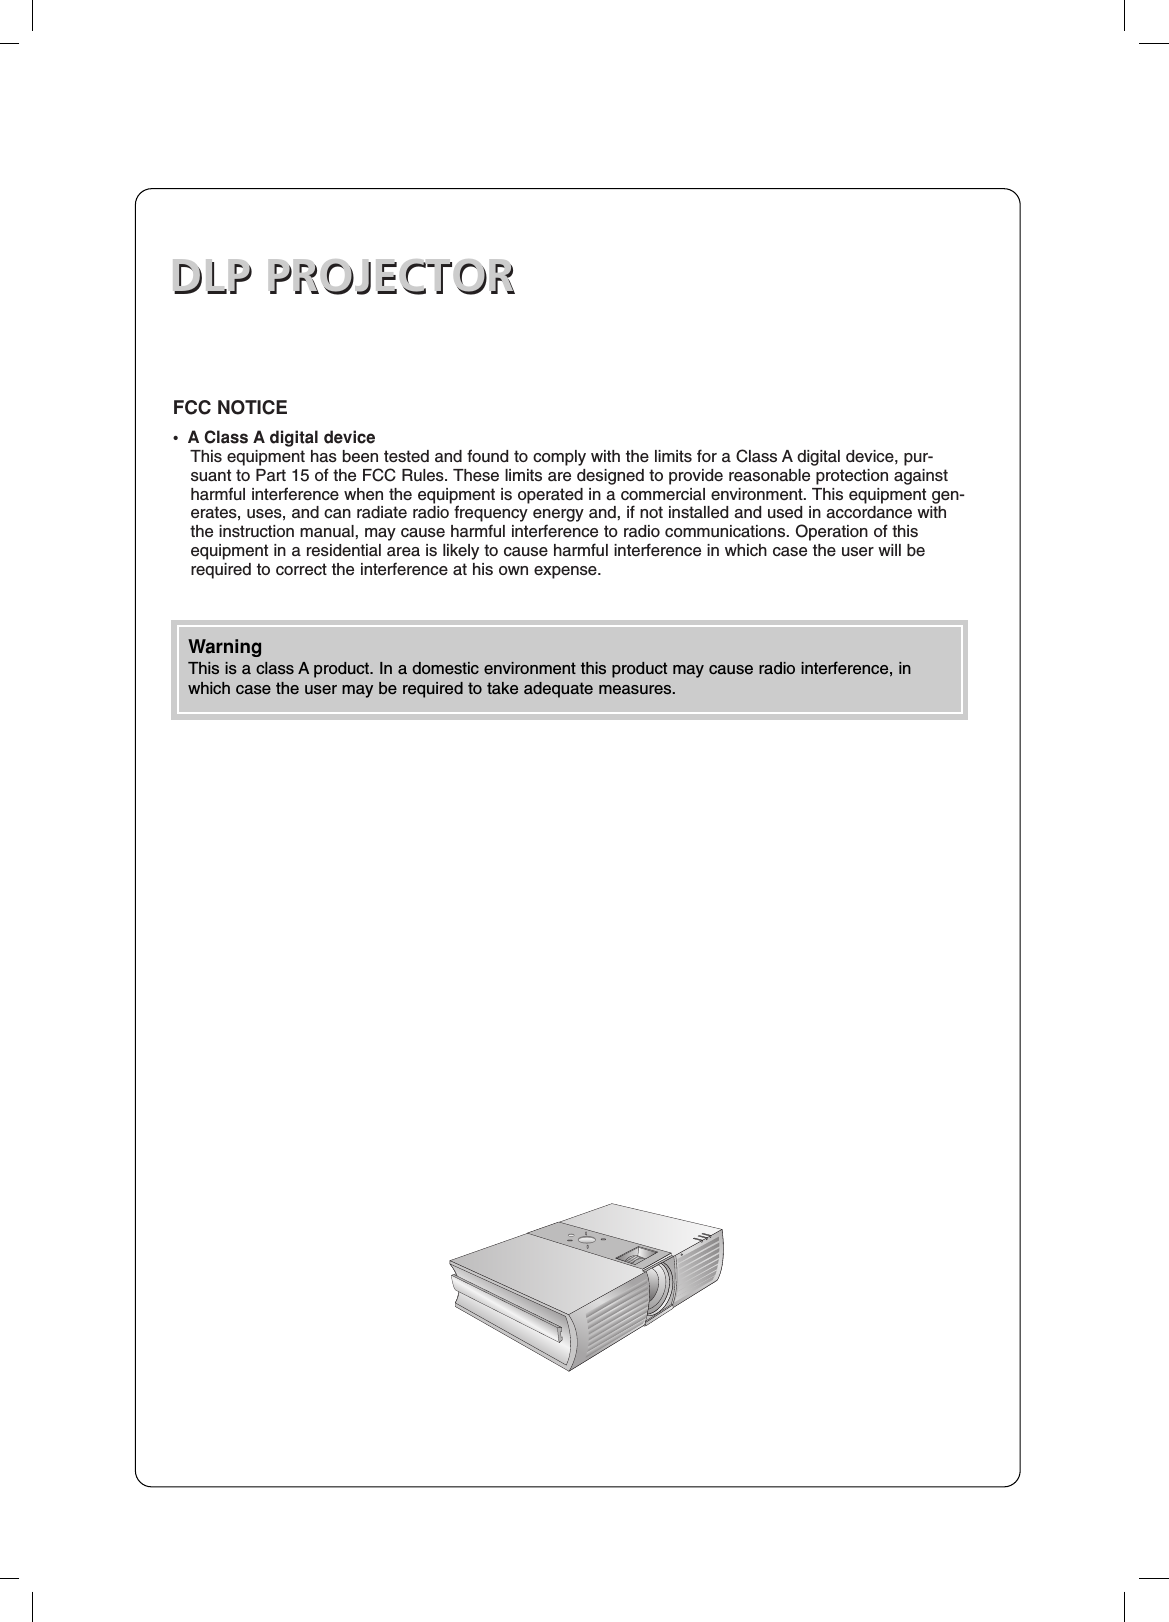 DLP PROJECTORDLP PROJECTORFCC NOTICE• A Class A digital deviceThis equipment has been tested and found to comply with the limits for a Class A digital device, pur-suant to Part 15 of the FCC Rules. These limits are designed to provide reasonable protection againstharmful interference when the equipment is operated in a commercial environment. This equipment gen-erates, uses, and can radiate radio frequency energy and, if not installed and used in accordance withthe instruction manual, may cause harmful interference to radio communications. Operation of thisequipment in a residential area is likely to cause harmful interference in which case the user will berequired to correct the interference at his own expense.WarningThis is a class A product. In a domestic environment this product may cause radio interference, inwhich case the user may be required to take adequate measures.